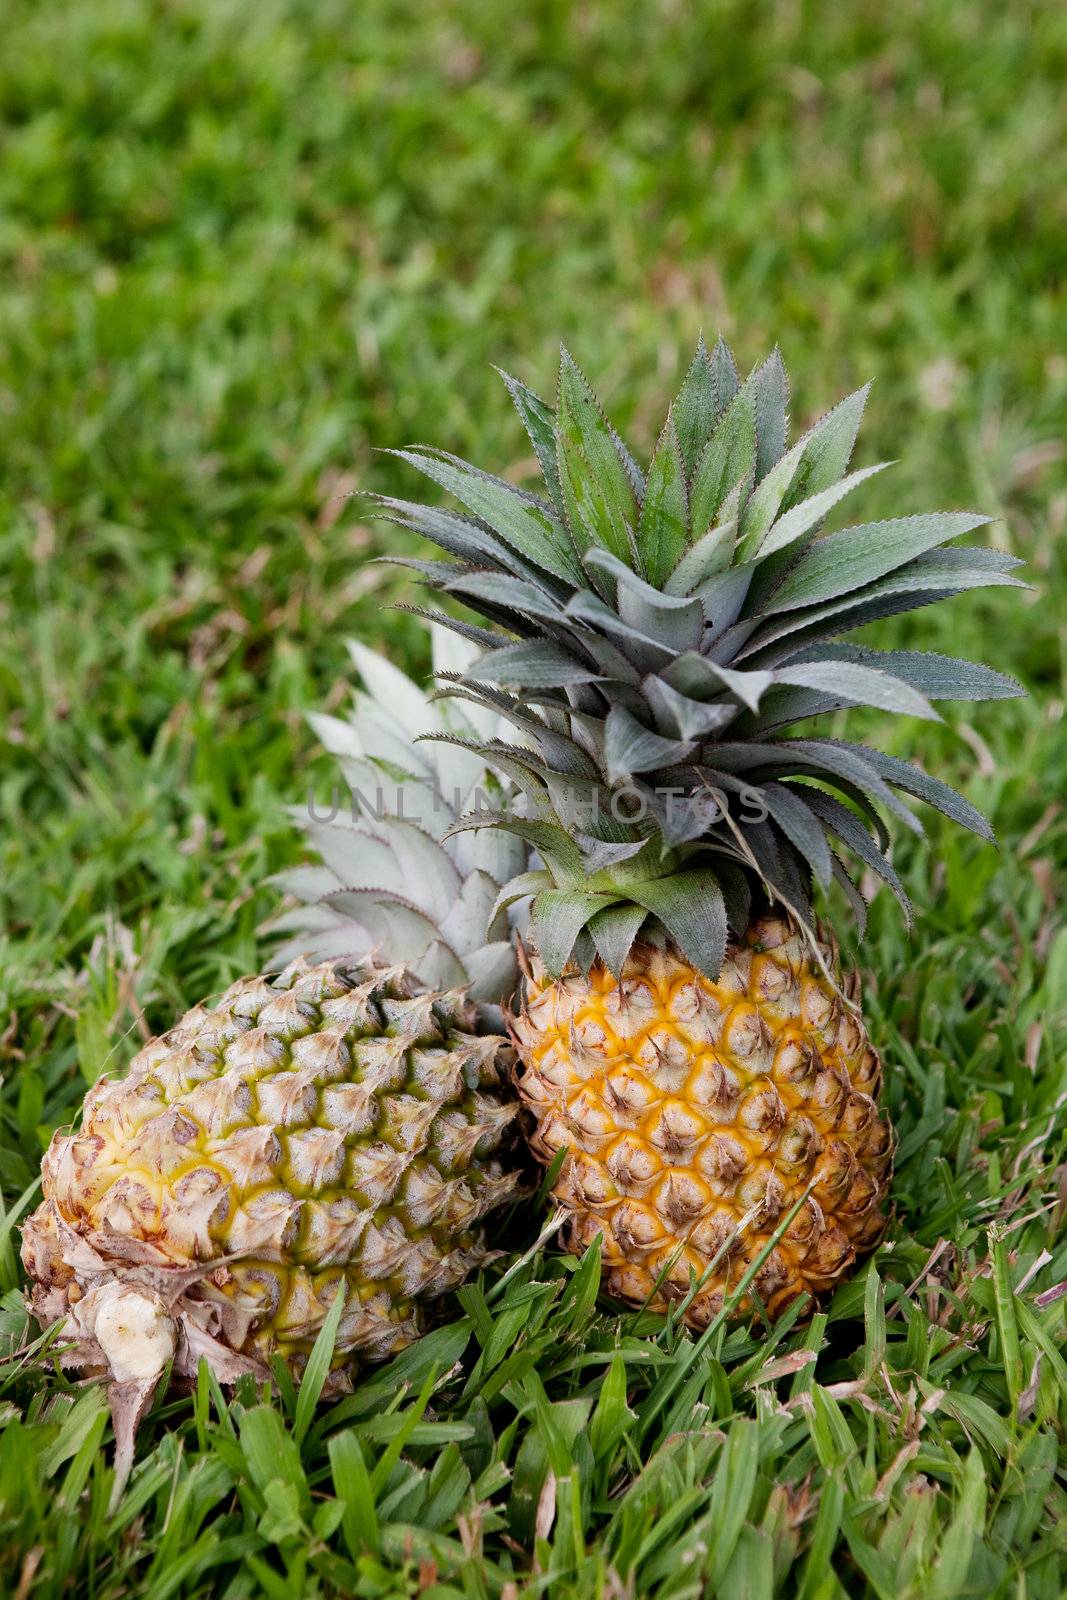 Two freshly picked pineapples in grass